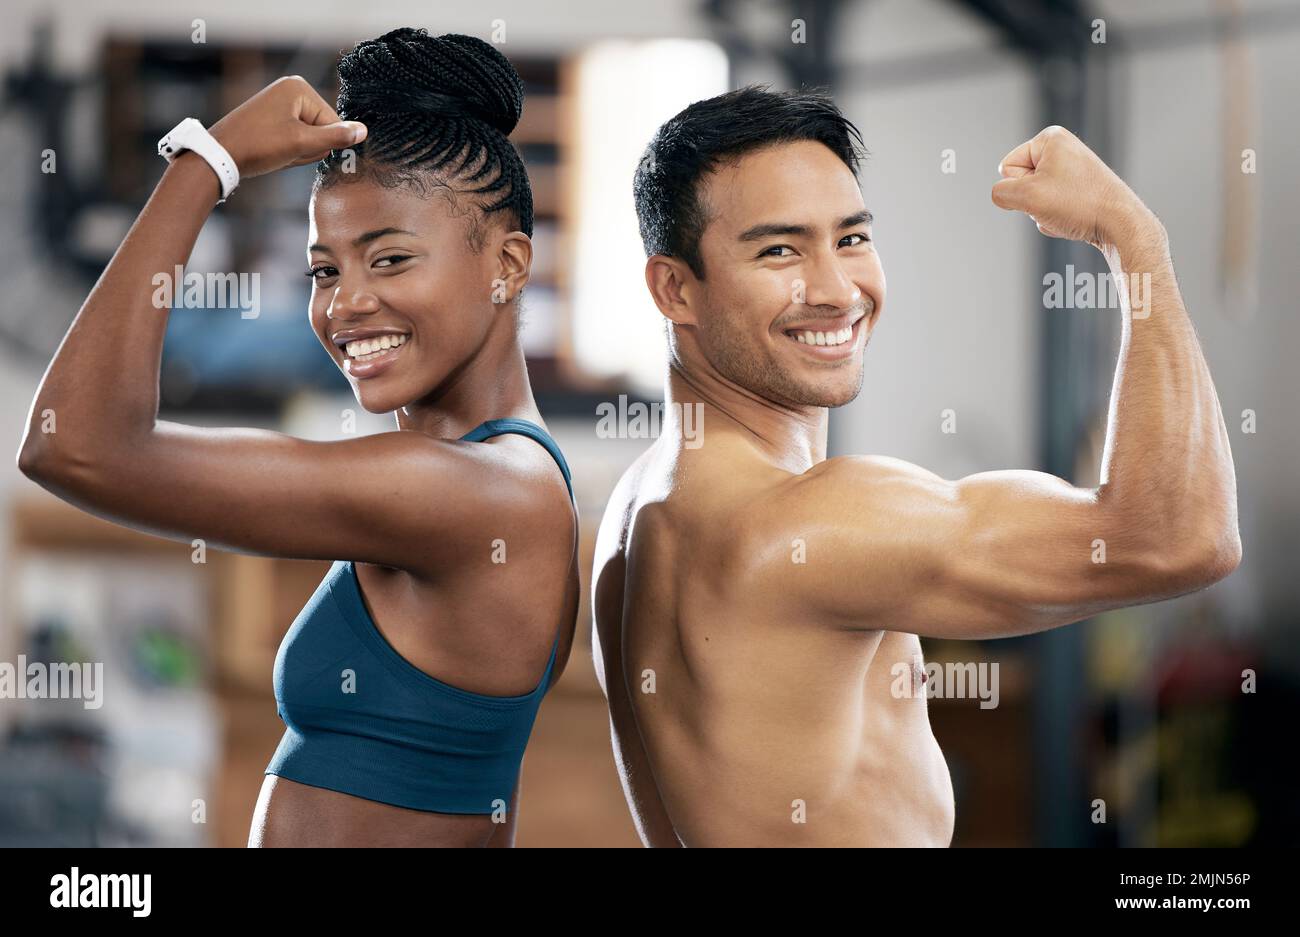 Portrait, black woman or coach flexing muscle or body goals in training or fitness exercise at gym. Coaching results, happy friends or healthy sports Stock Photo